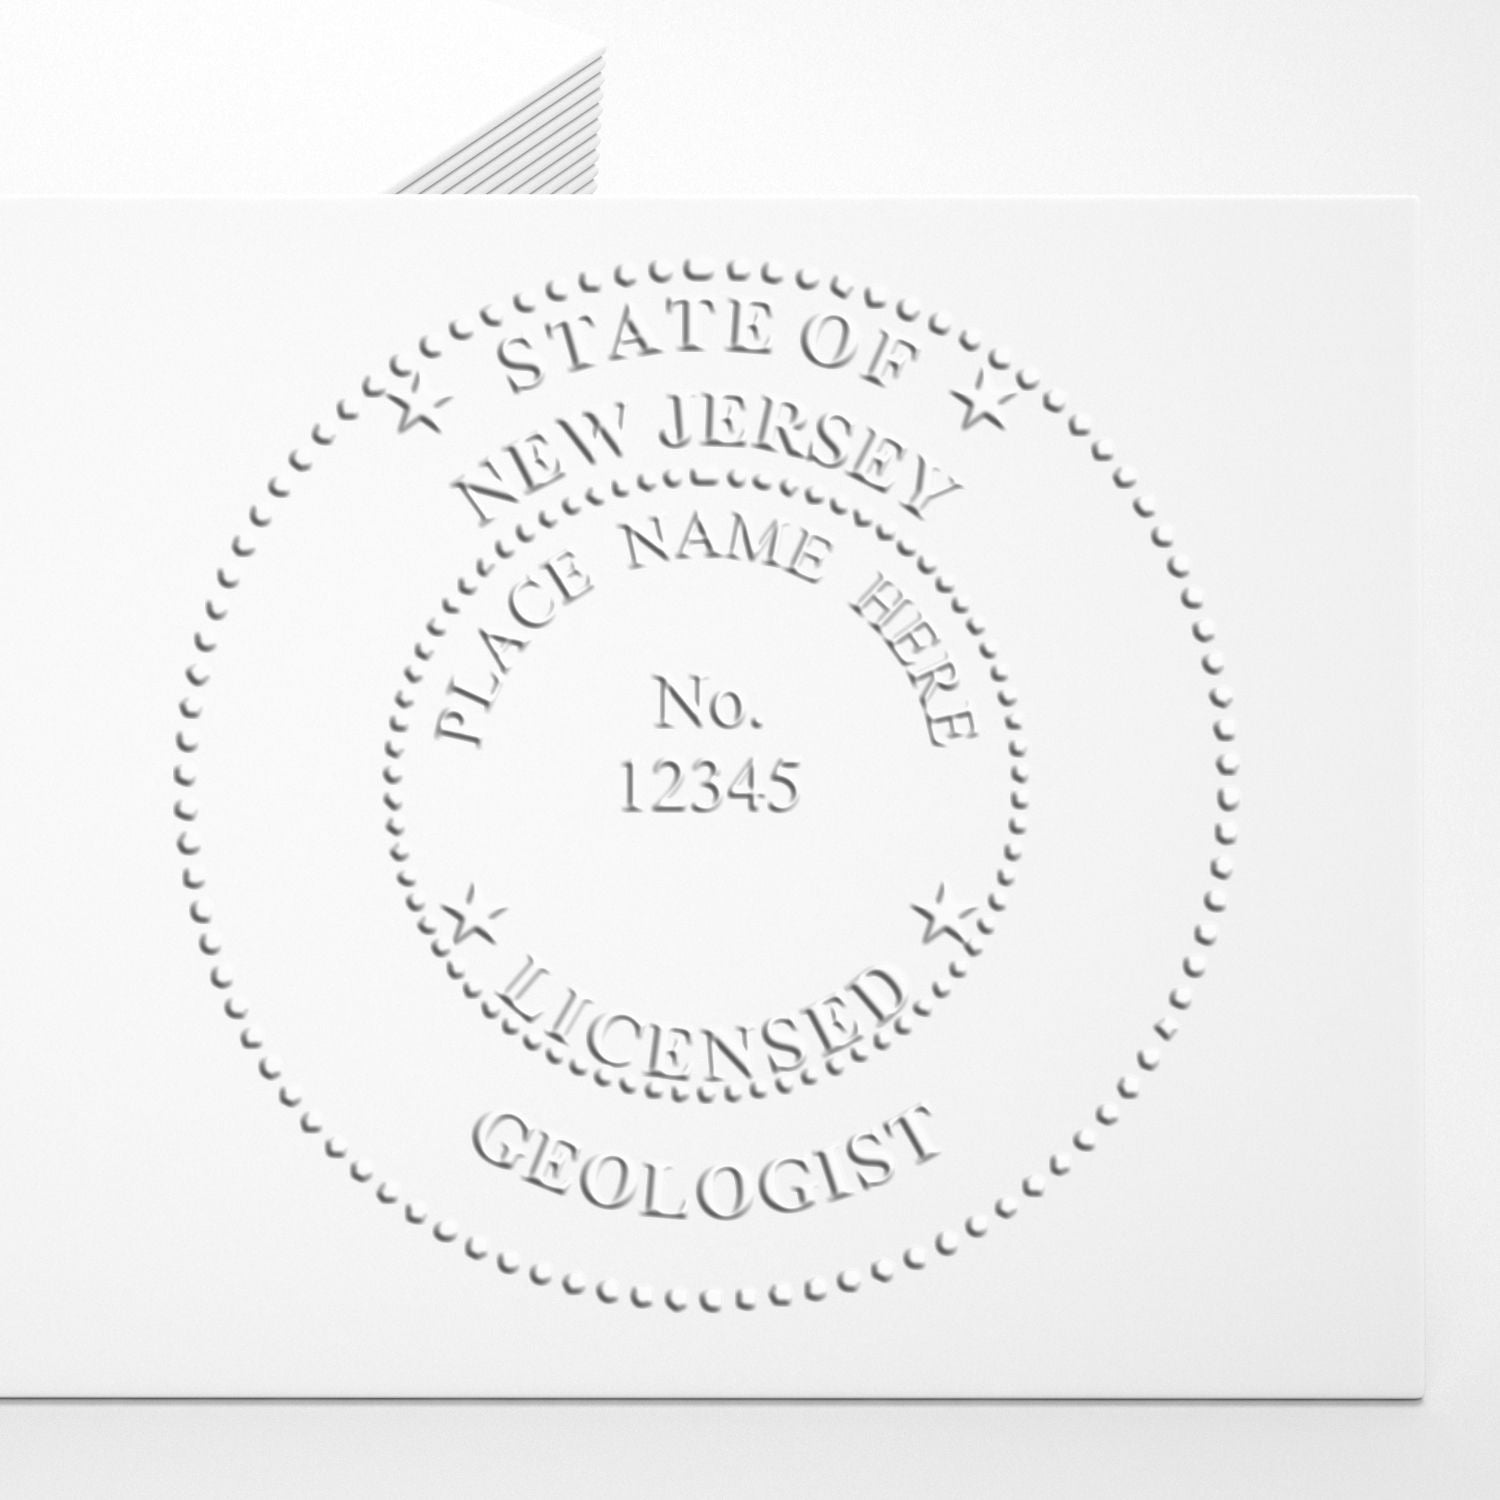 An in use photo of the New Jersey Geologist Desk Seal showing a sample imprint on a cardstock